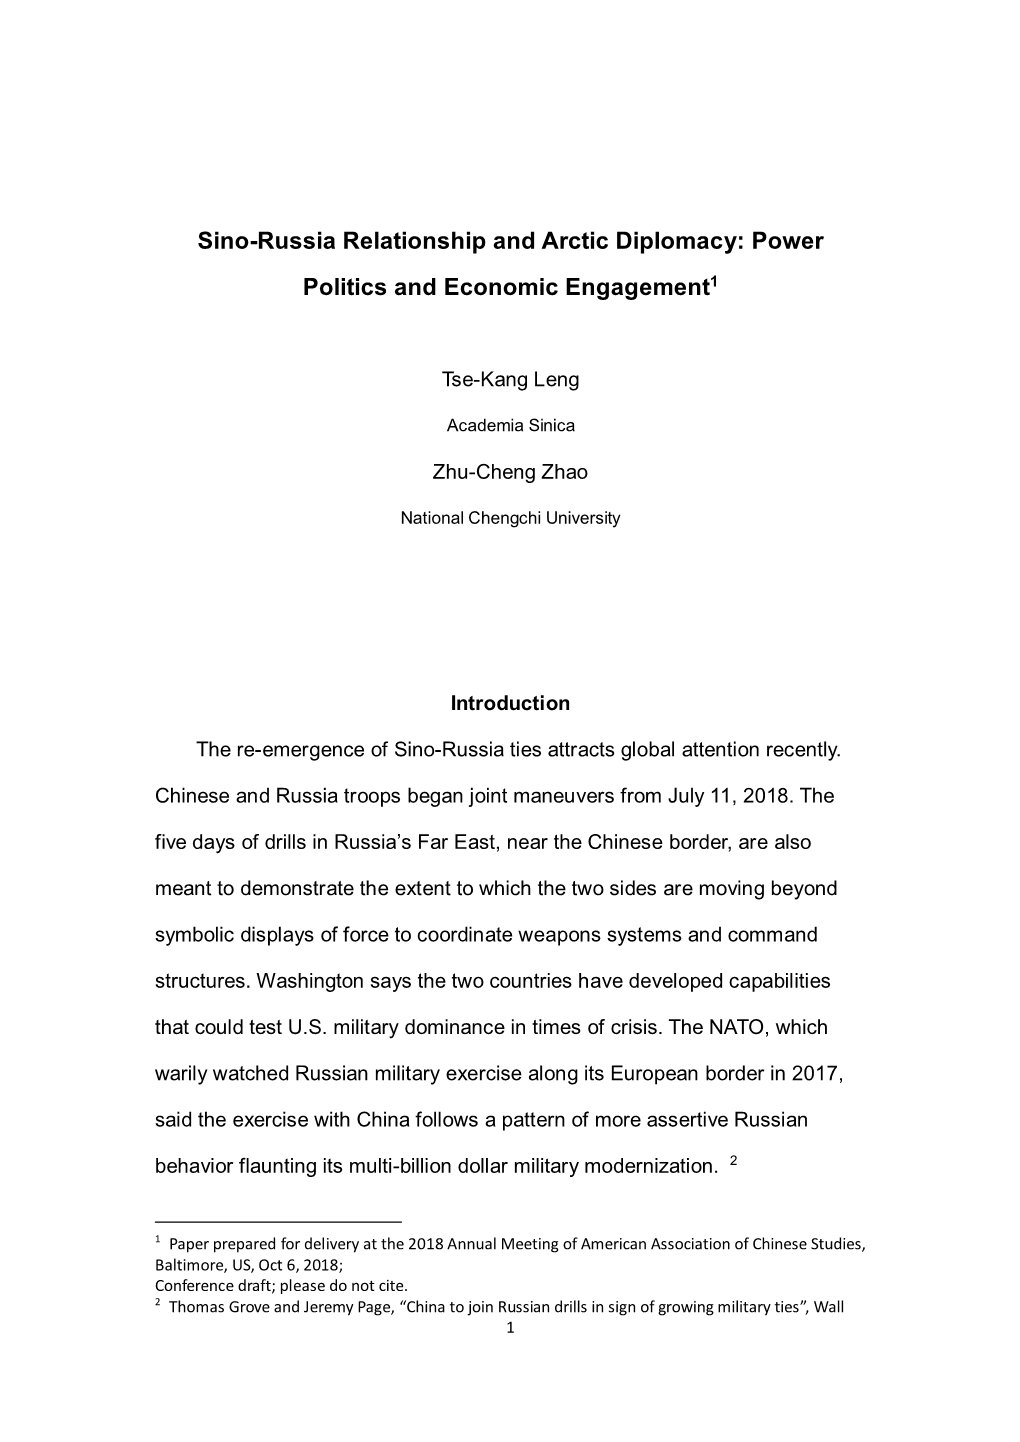 Sino-Russian Relationshop and Arctic Diplomacy